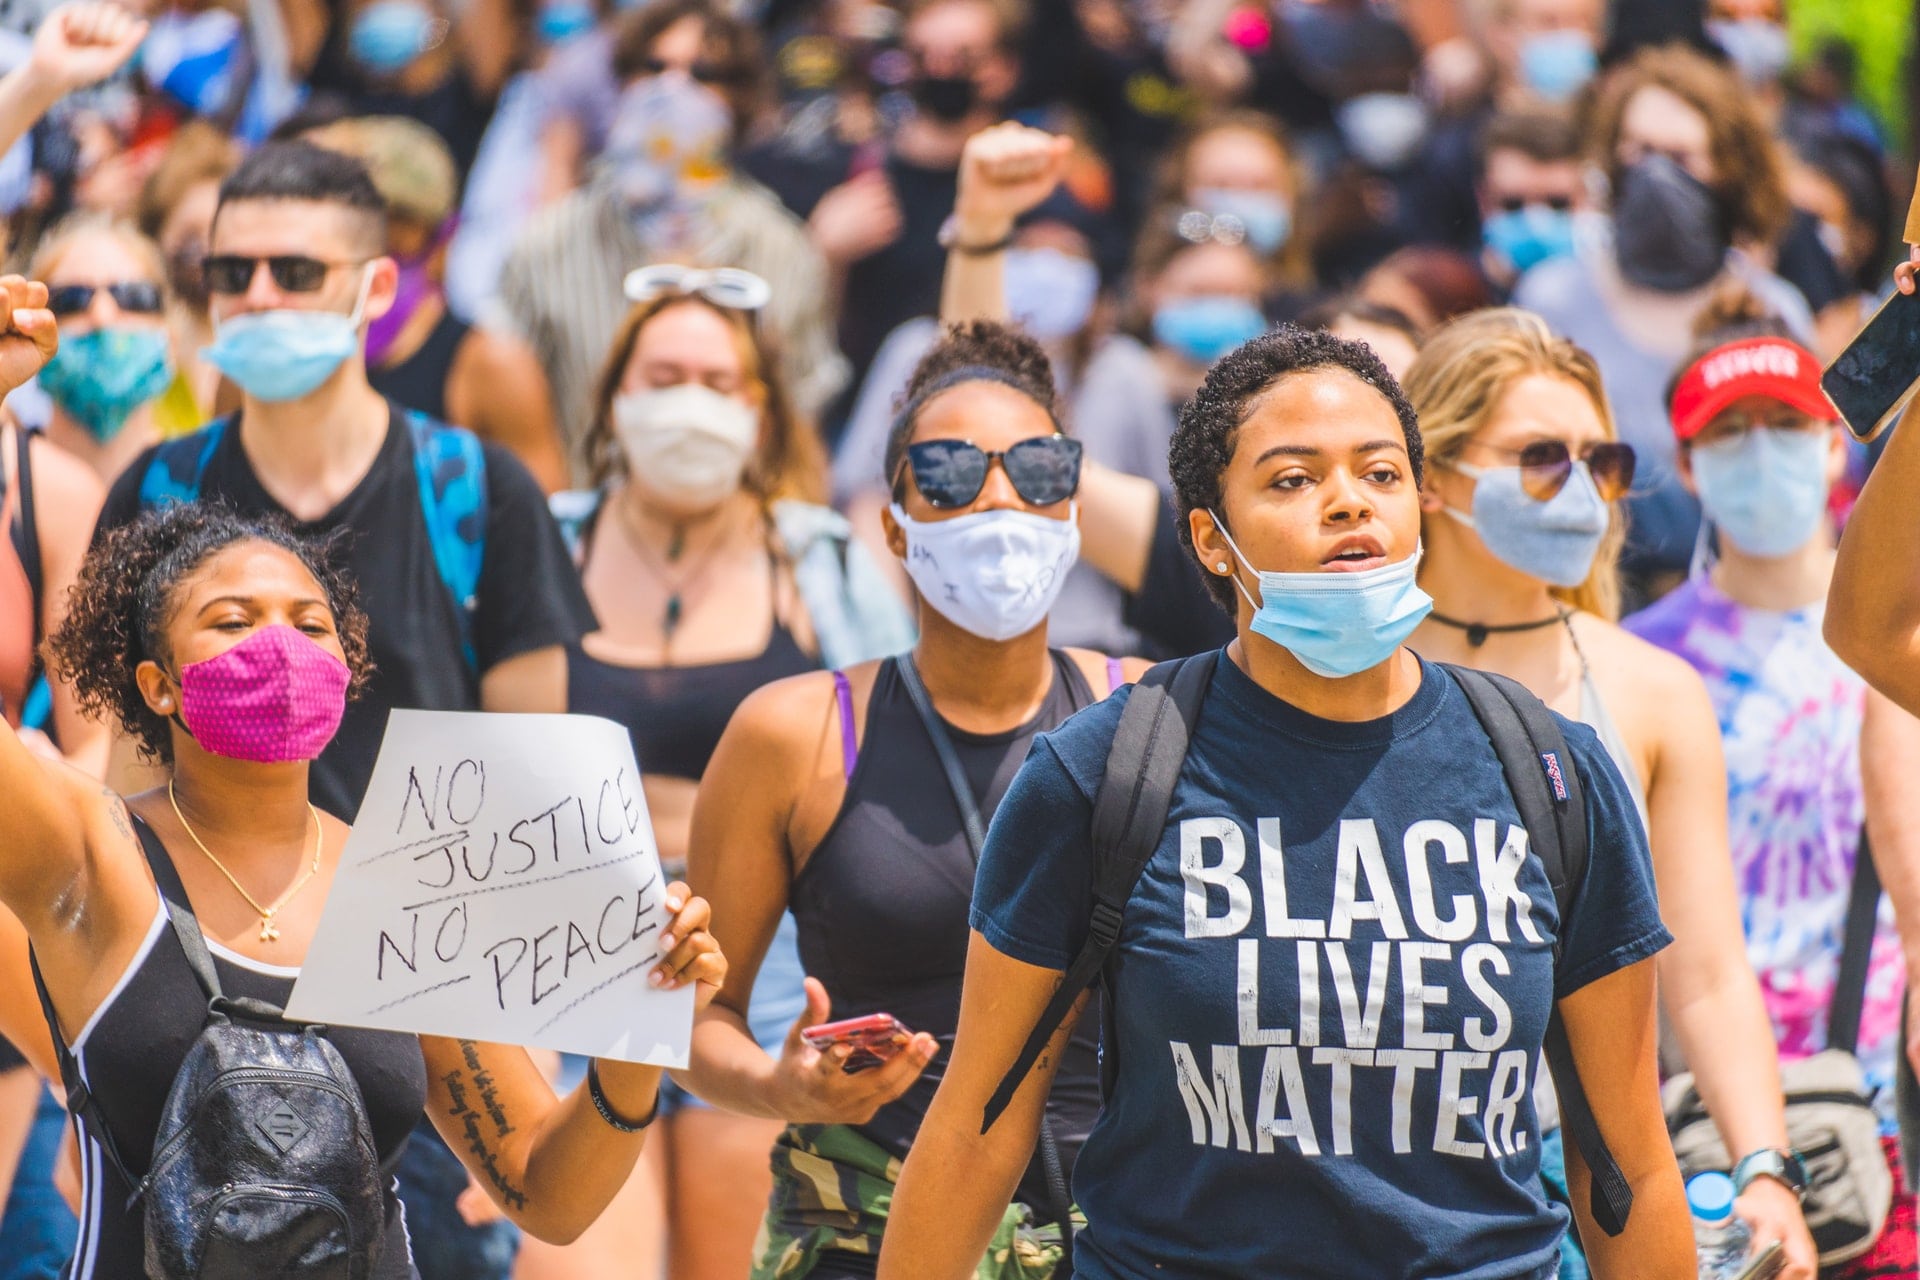 A young woman wearing a mask and black lives matter t-shirt 
                              marching in a #BlackLivesMatter public demonstration in Cincinnati.